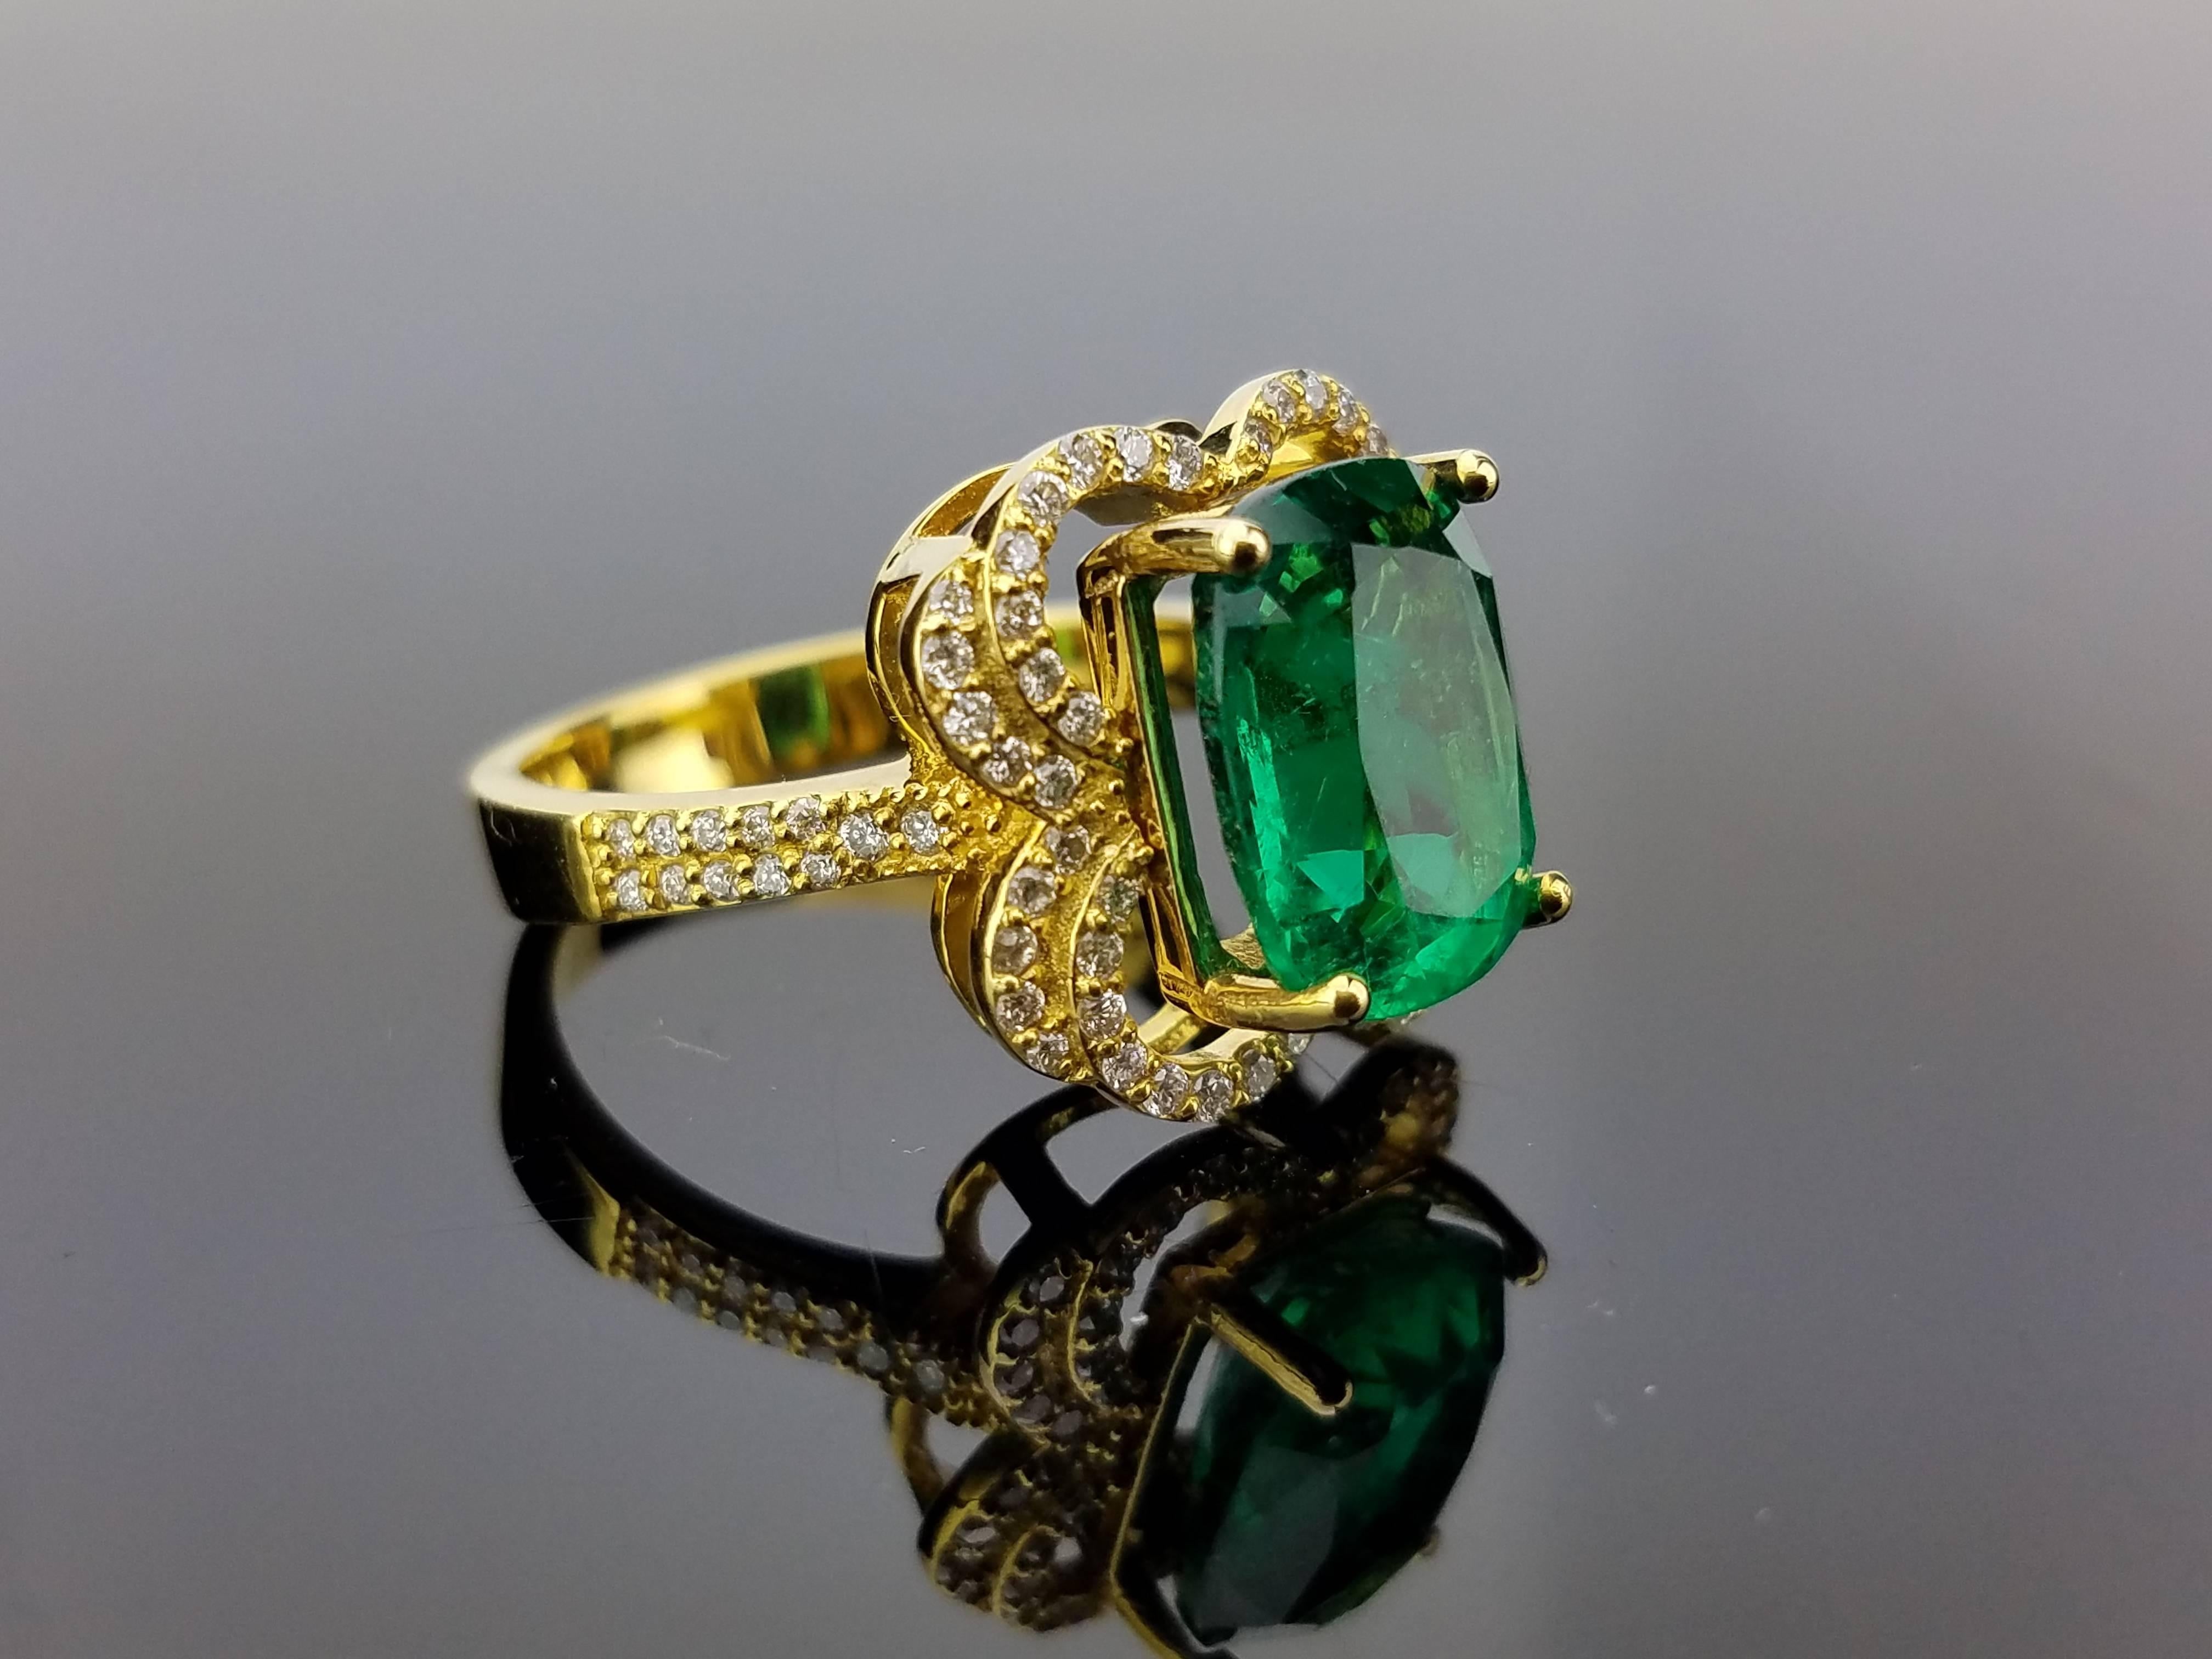 A unique combination of  Zambian Emerald of great quality (clean and lustrous) and diamond set on 18K yellow gold - creating this beautiful cocktail ring

Stone Details: 
Stone: Emerald
Carat Weight: 4.77 Carats

Diamond Details: 
Total Carat